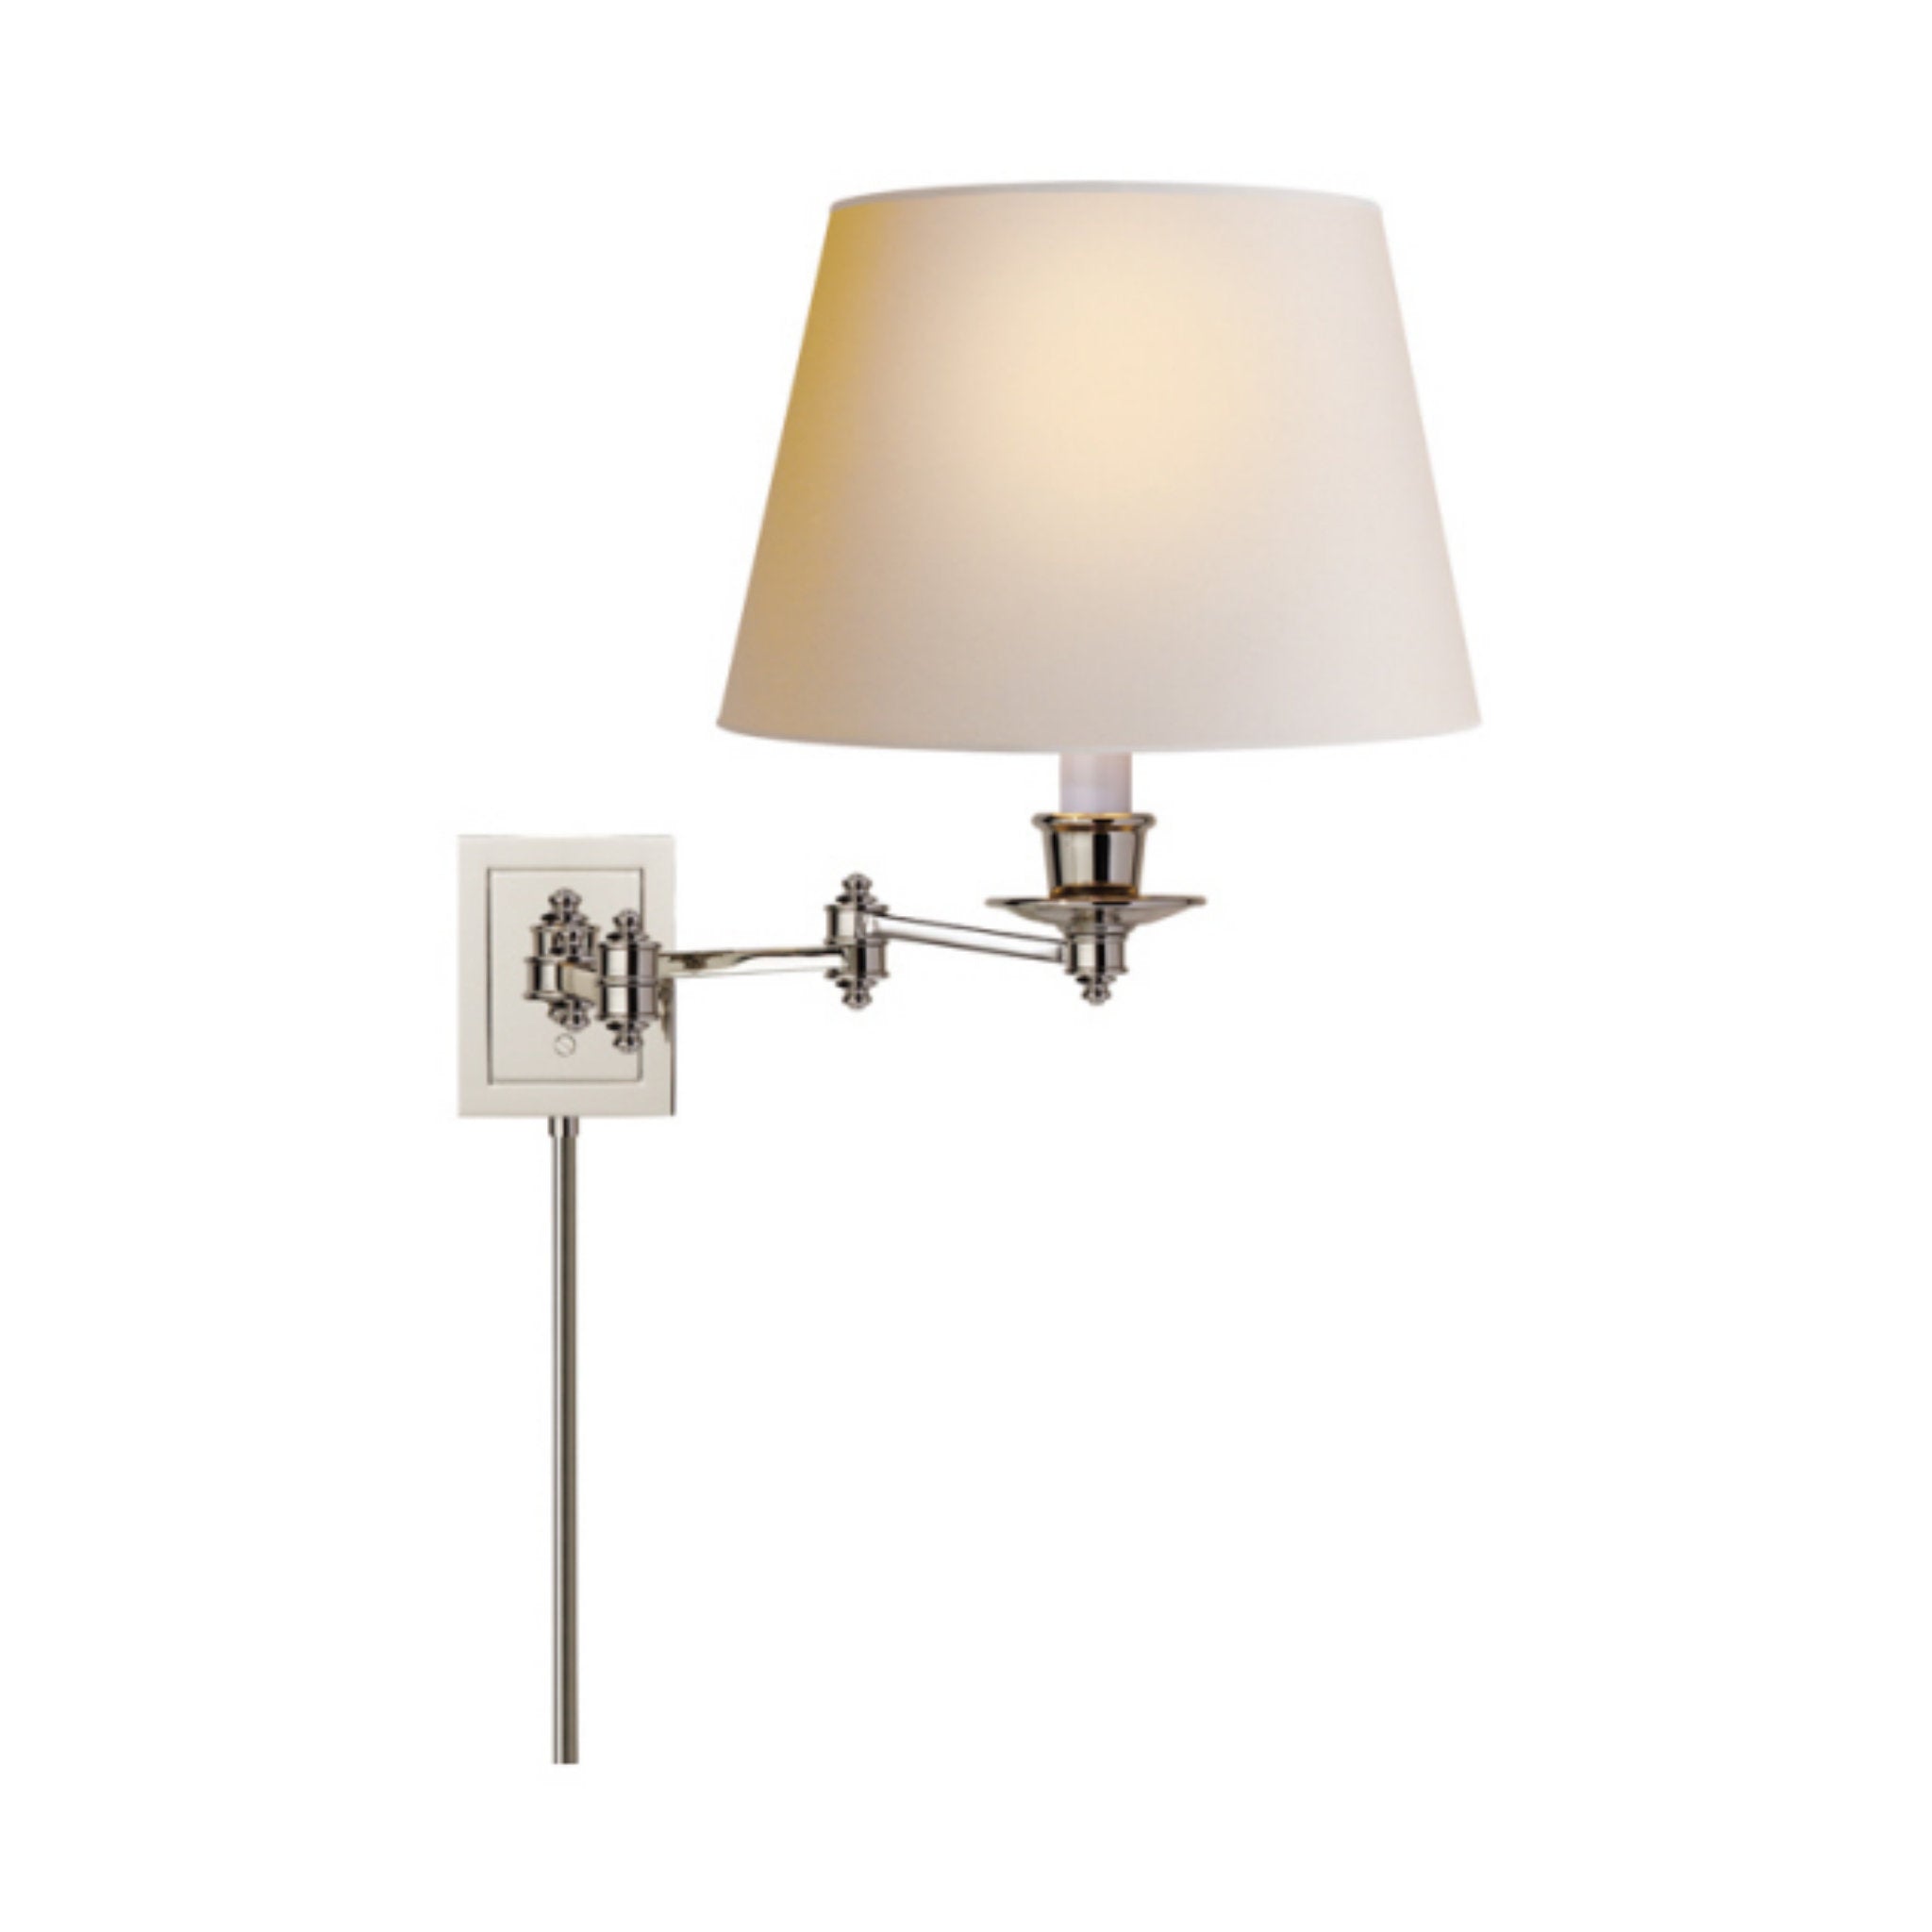 Visual Comfort Triple Swing Arm Wall Lamp in Polished Nickel with Natural Paper Shade